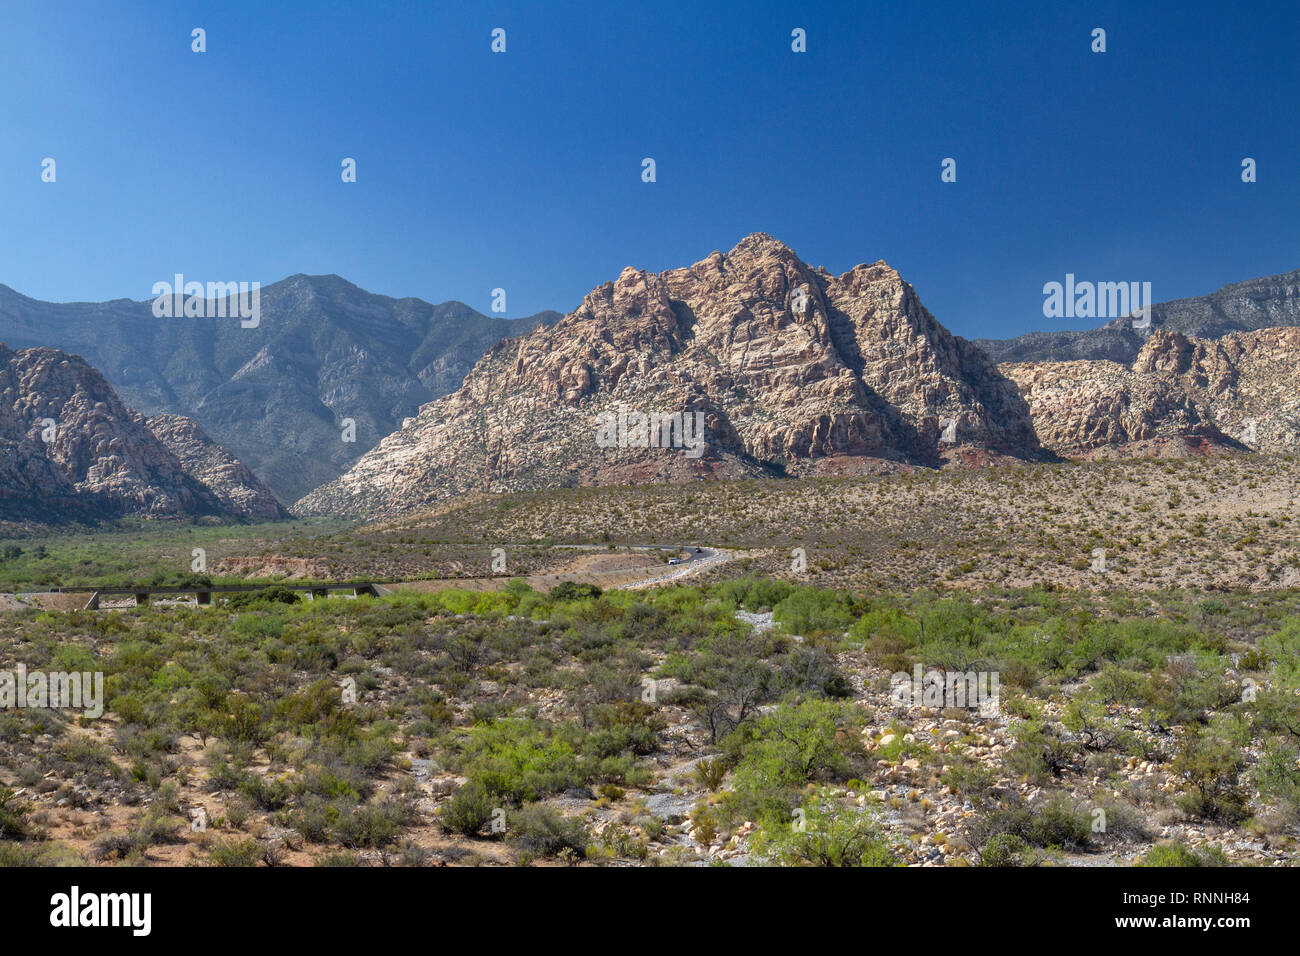 View towards the White Rock Hills, Red Rock Canyon National Conservation Area, Las Vegas, Nevada, United States. Stock Photo